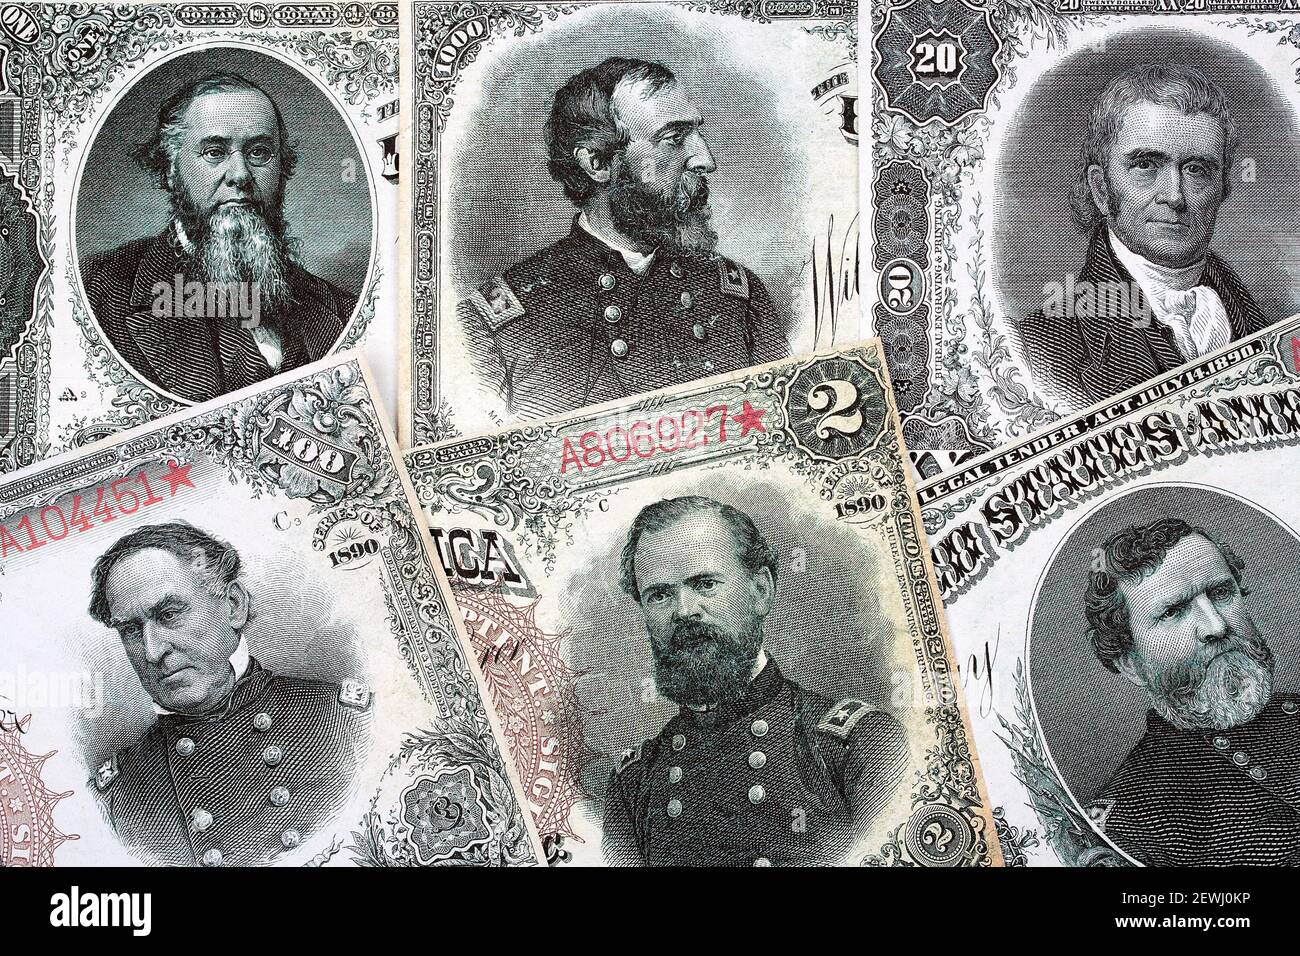 US Treasury Notes - USA currency issued in 1890 Stock Photo